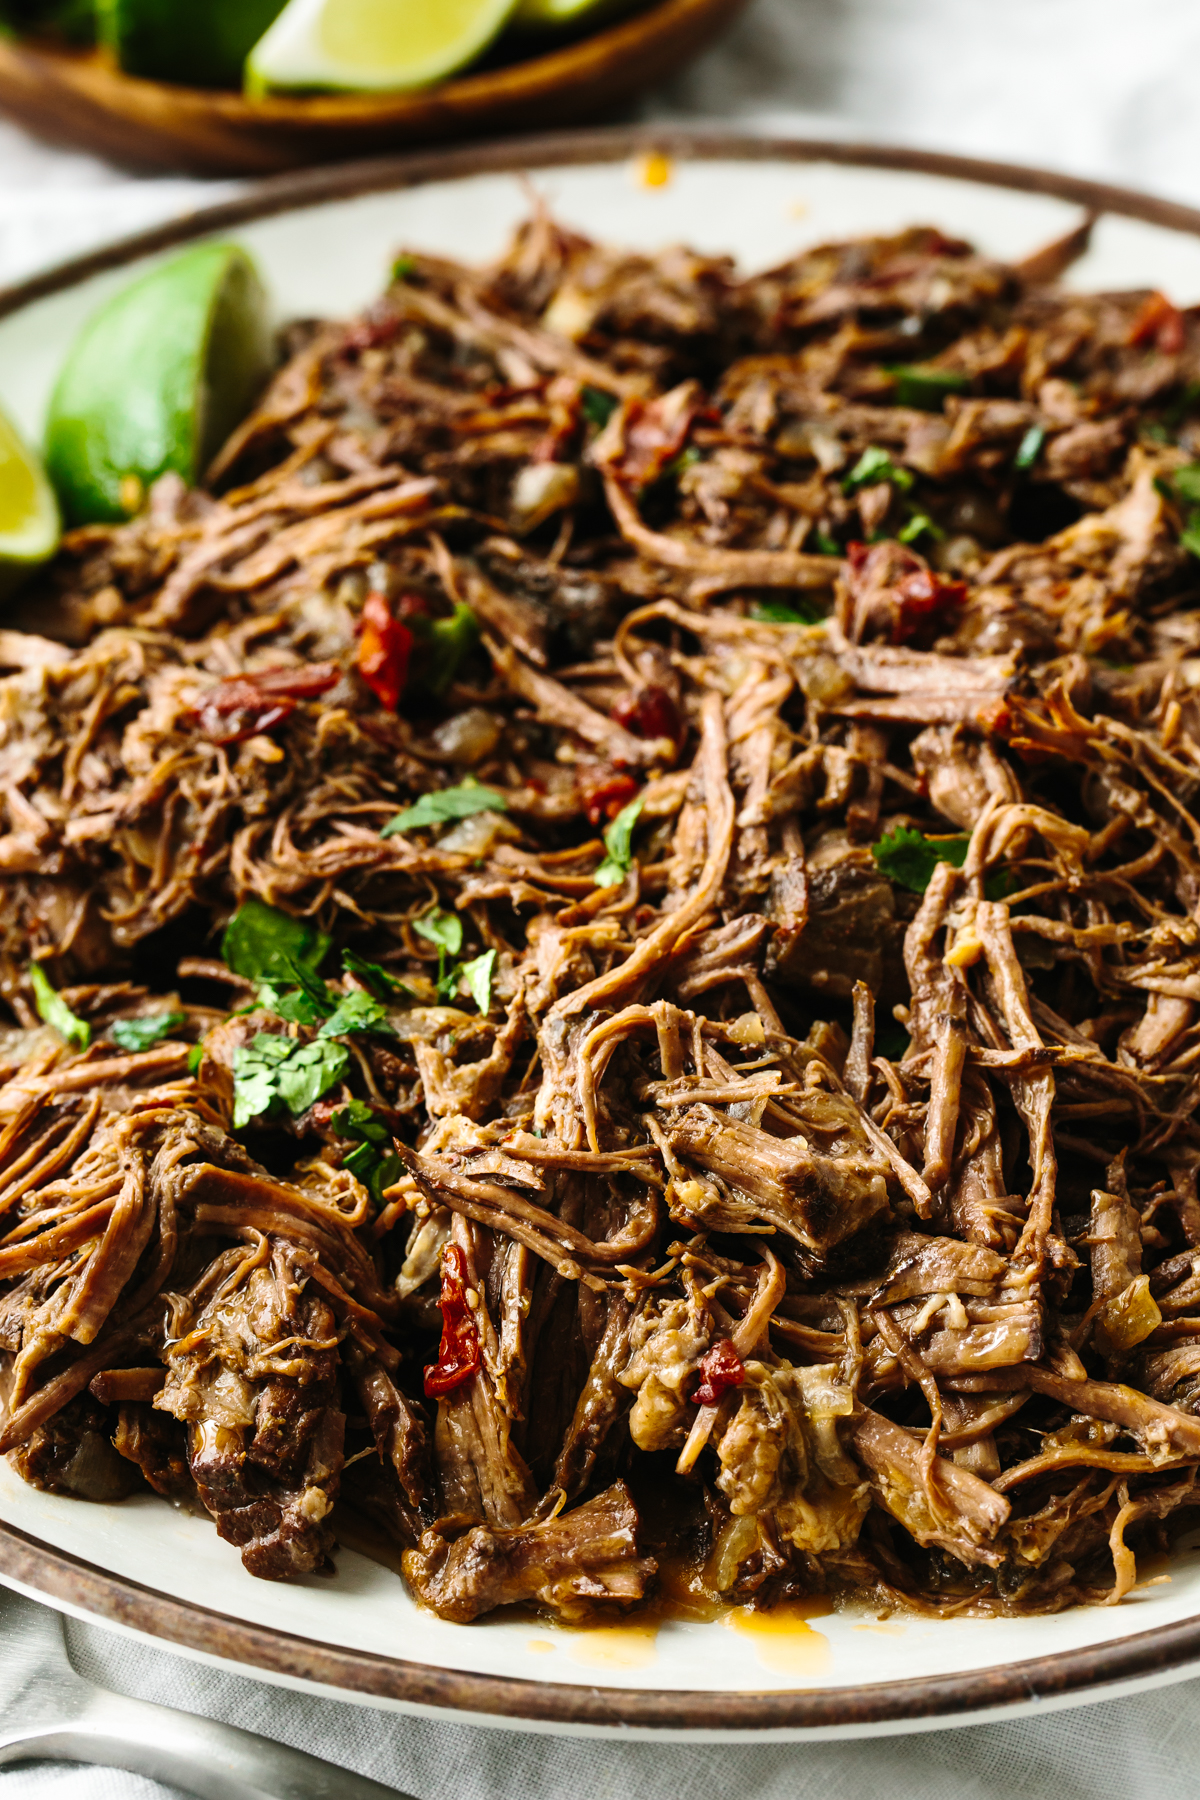 A plate with beef barbacoa on it.